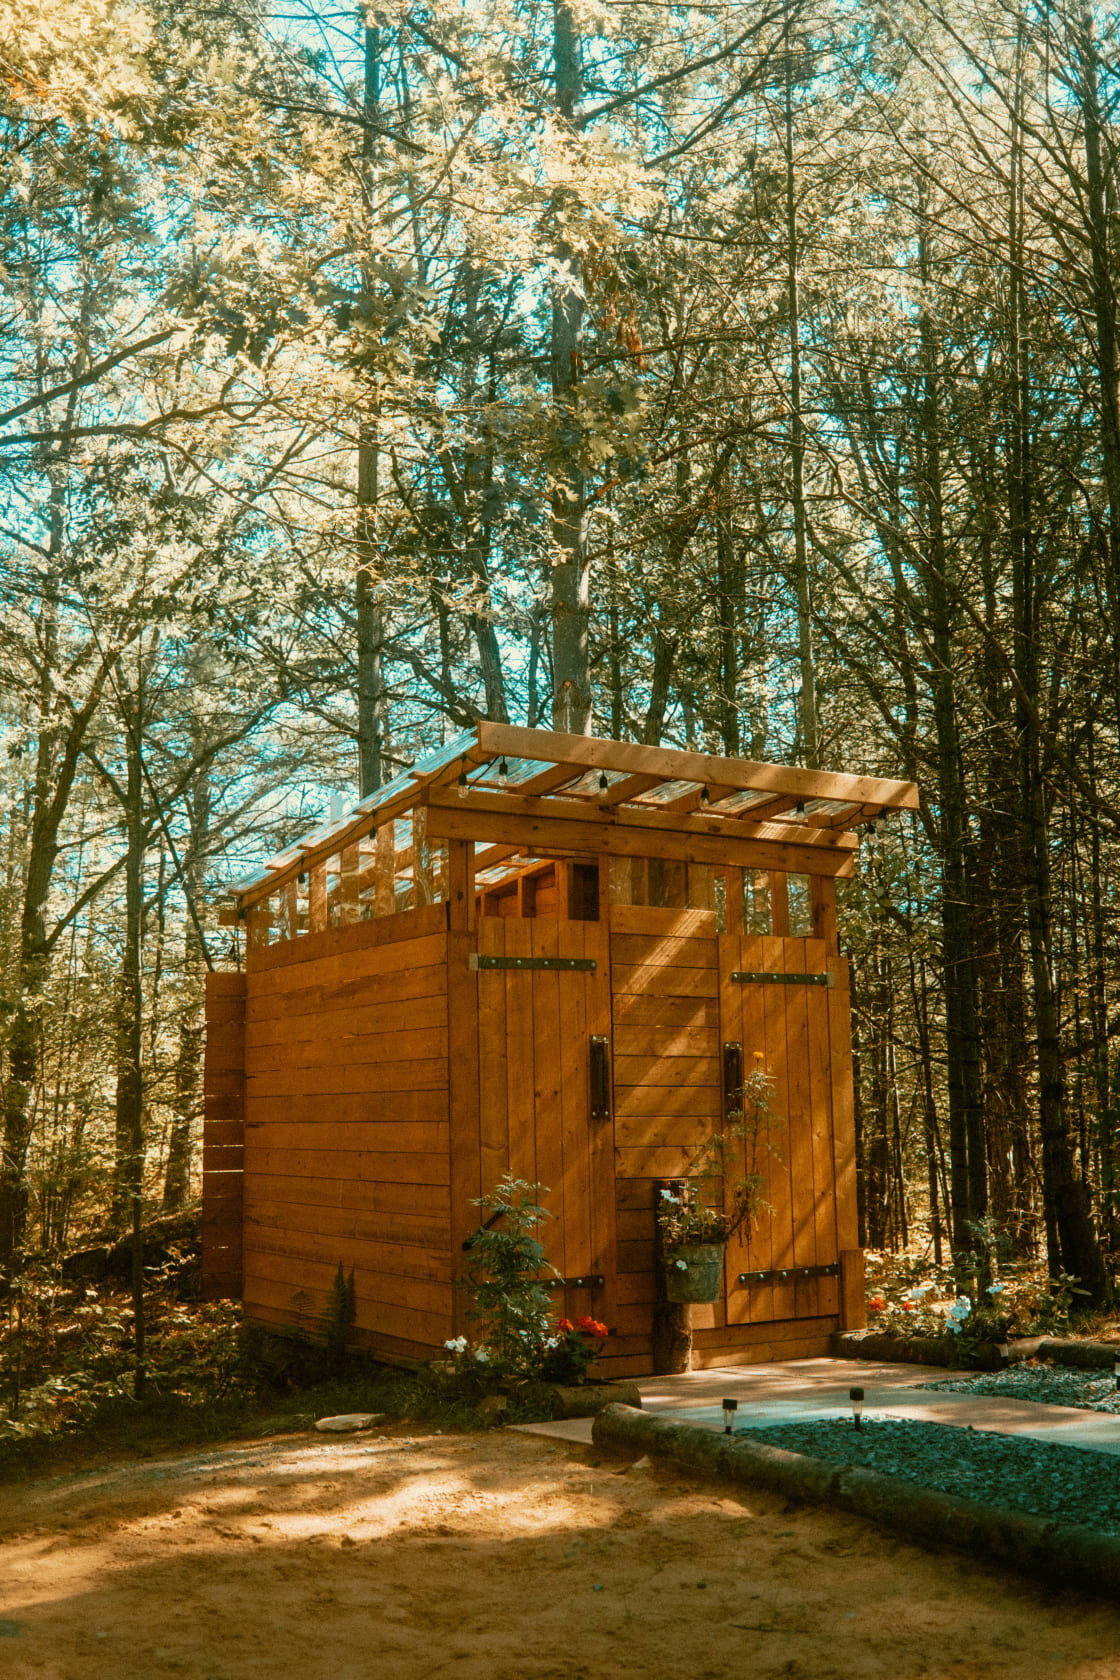 This beautiful outhouse with a hot shower!